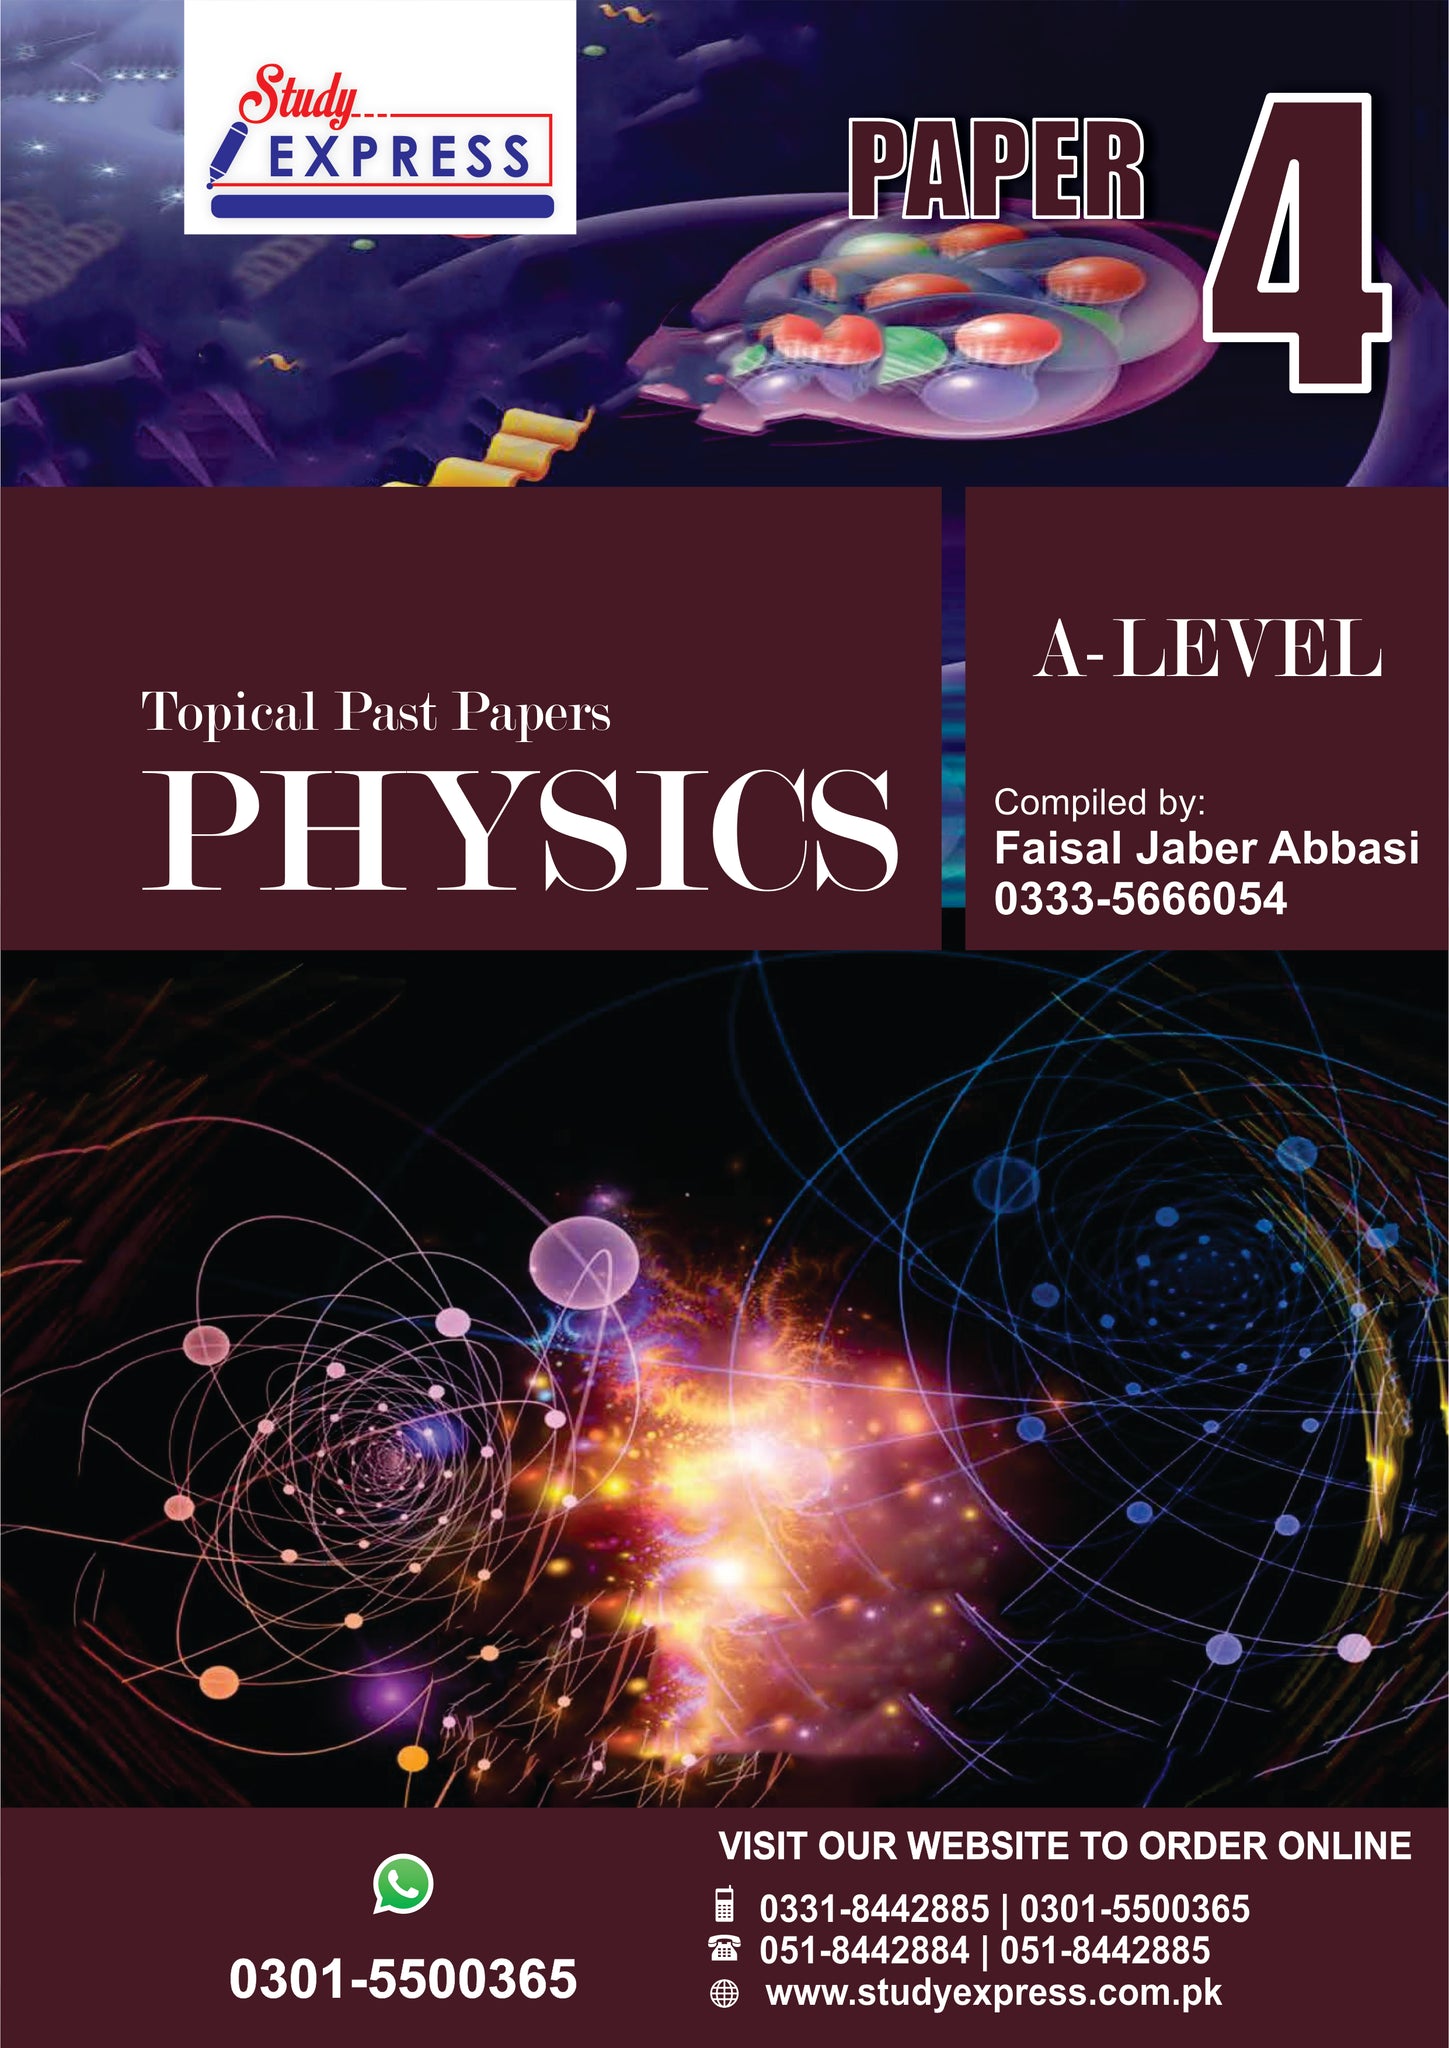 A-LEVEL PHYSICS TOPICAL PAPER 4 COMPILED BY: Fasial Jabber Abbasi